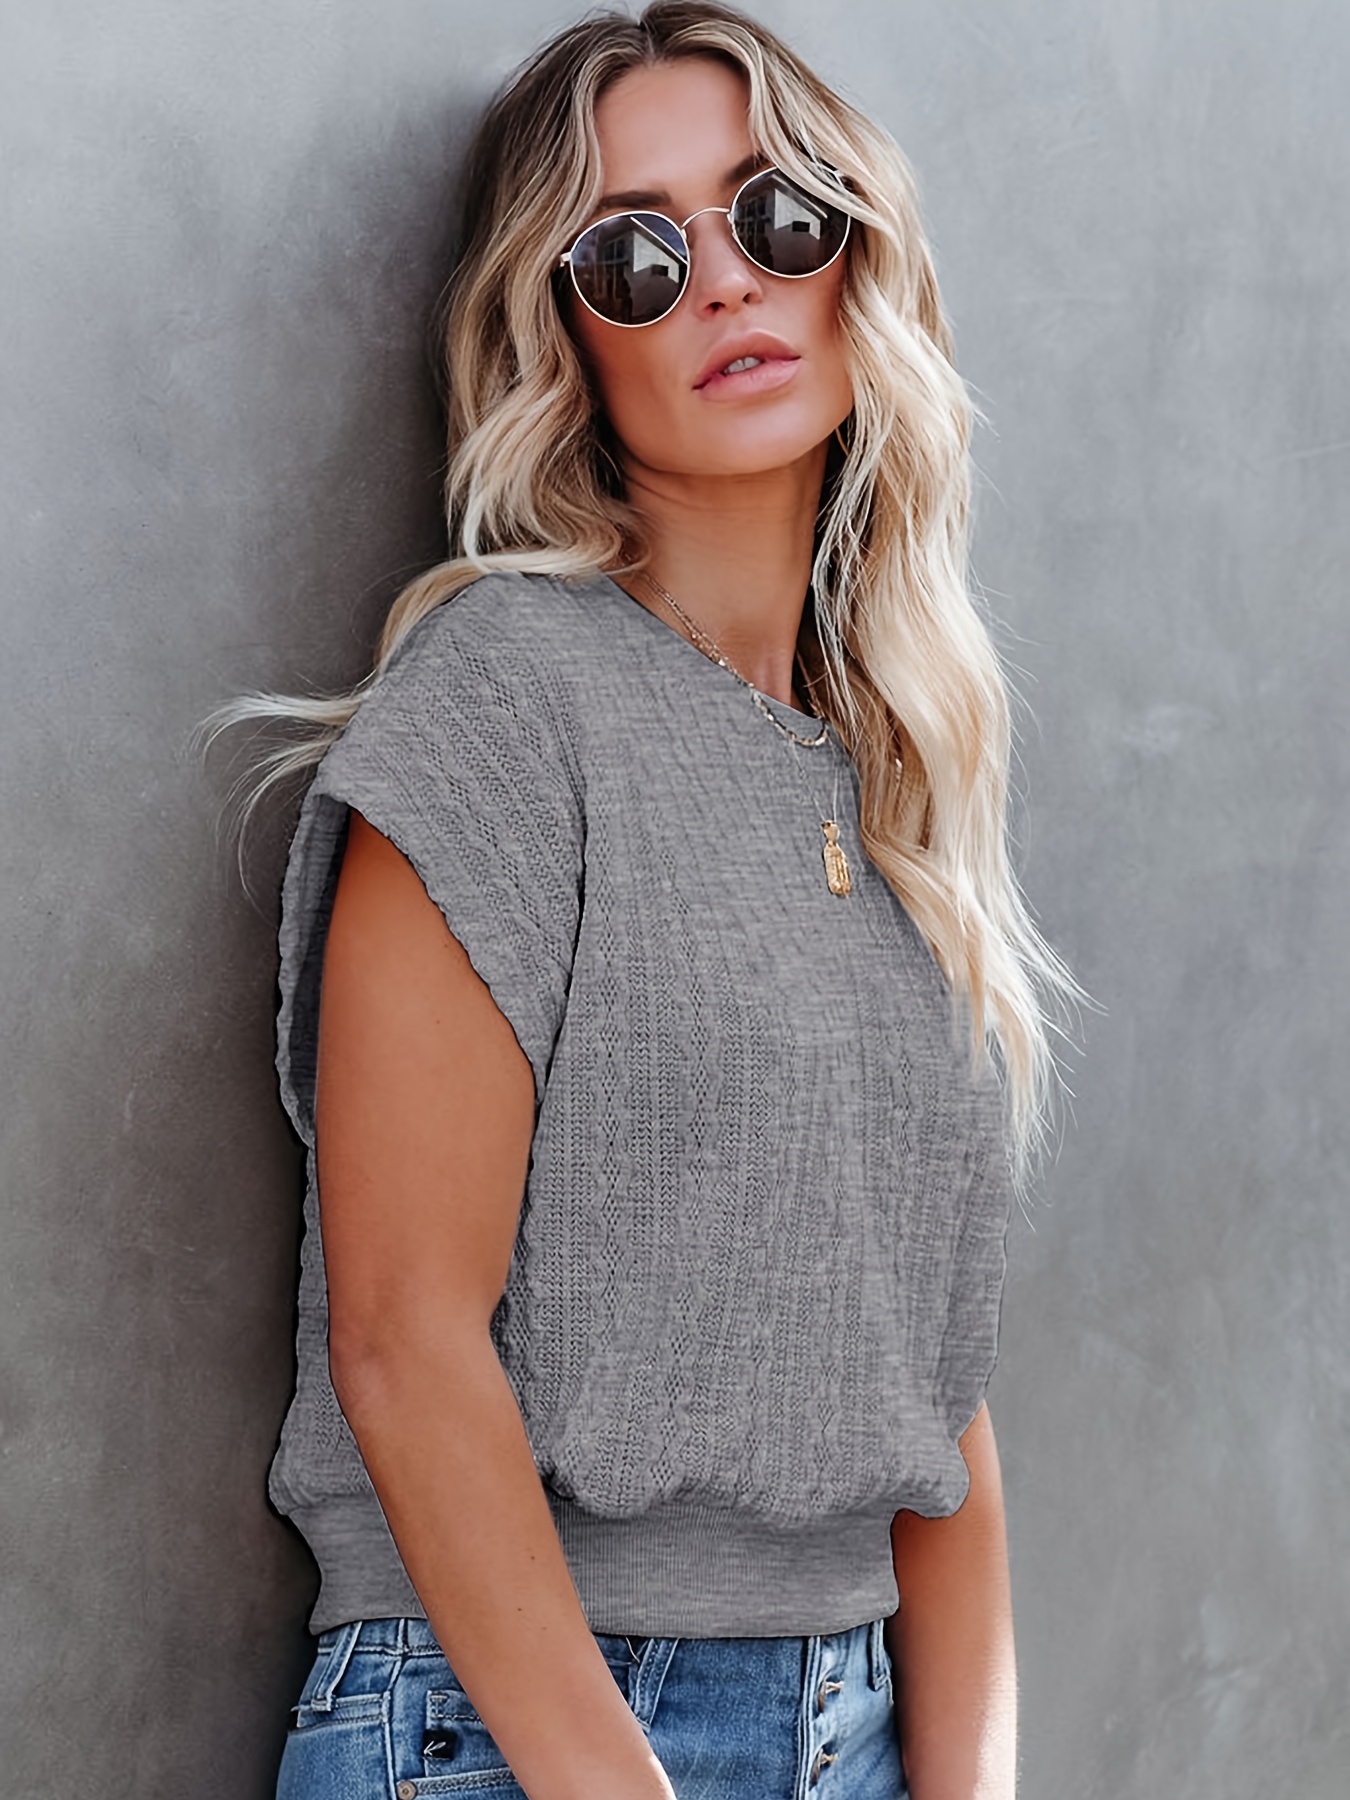 RQYYD Clearance Women's Summer Casual Crewneck Solid Color T Shirts Loose  Cap Sleeve Tee Tops Loose Fit Workout Blouses Dark Gray L 